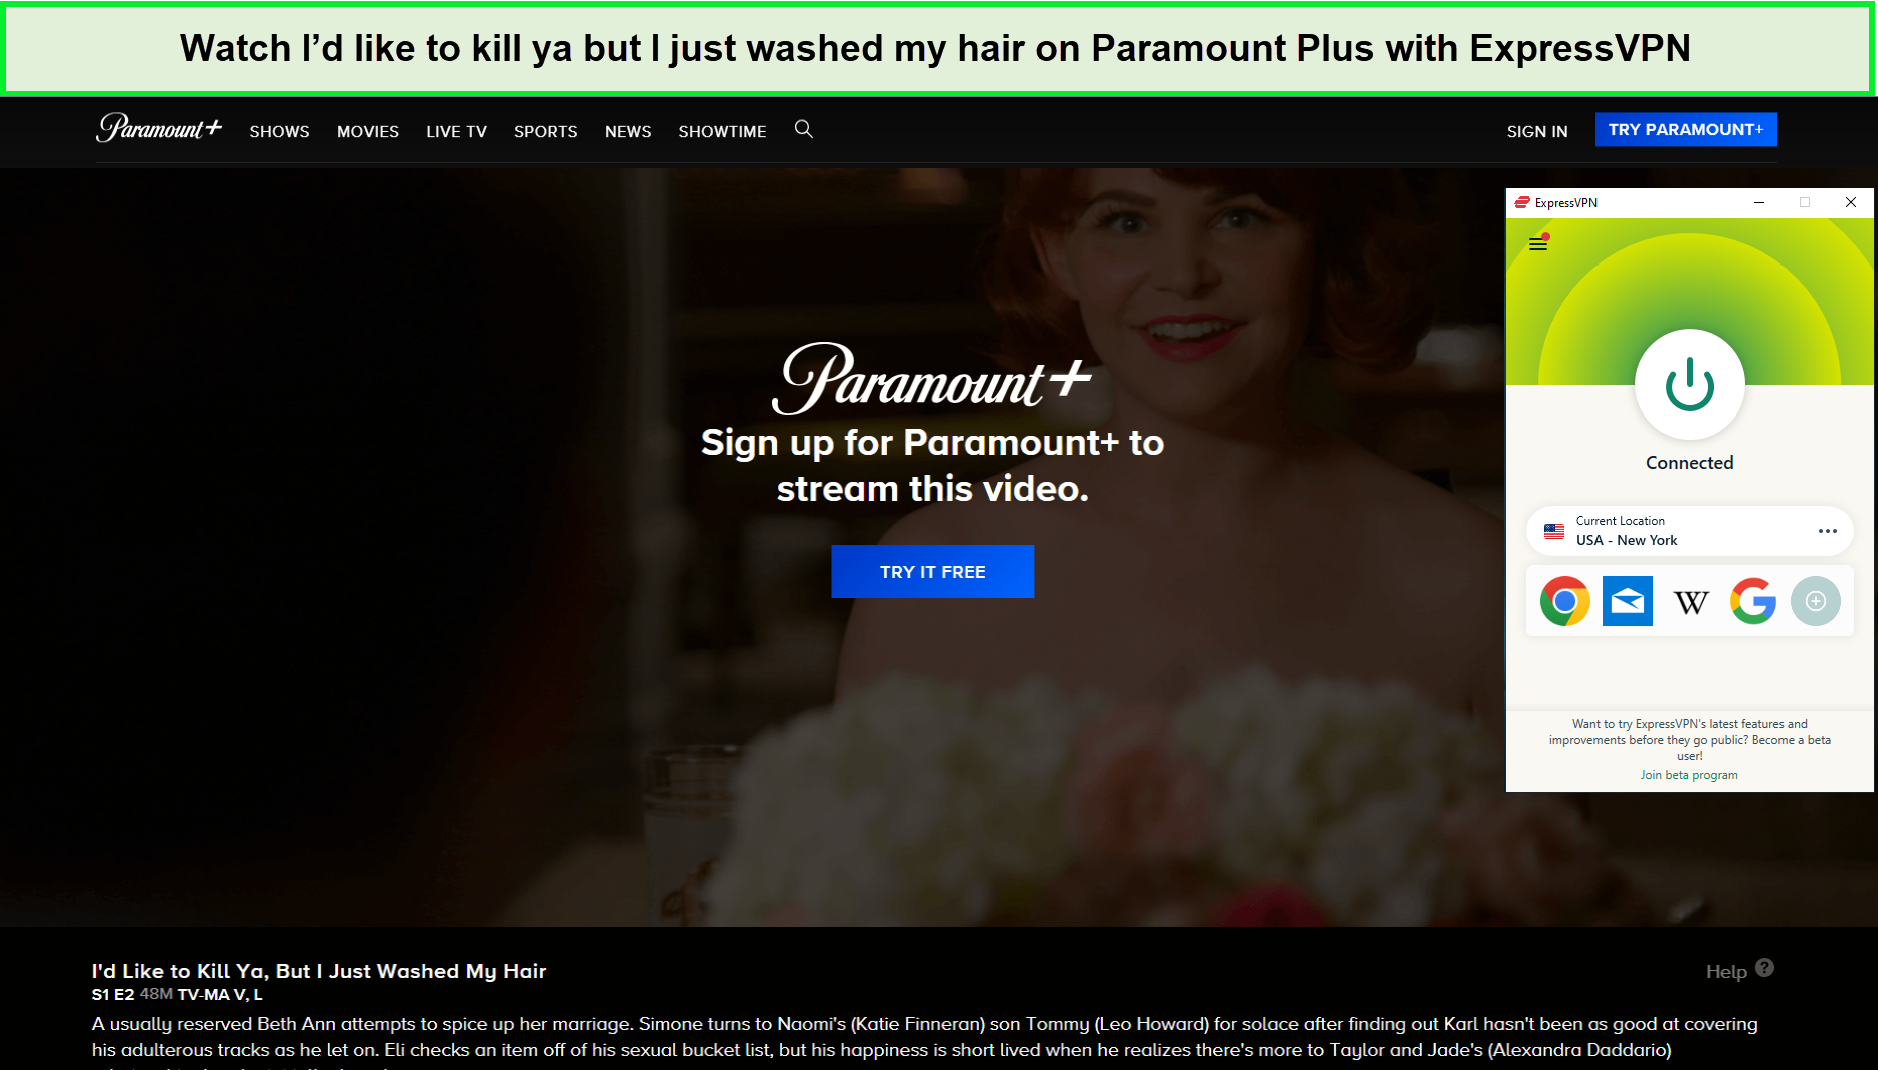 Watch-Id-like-to-kill-ya-but-I-just-washed-my-hair-in-Canadaon-Paramount-Plus-with-ExpressVPN